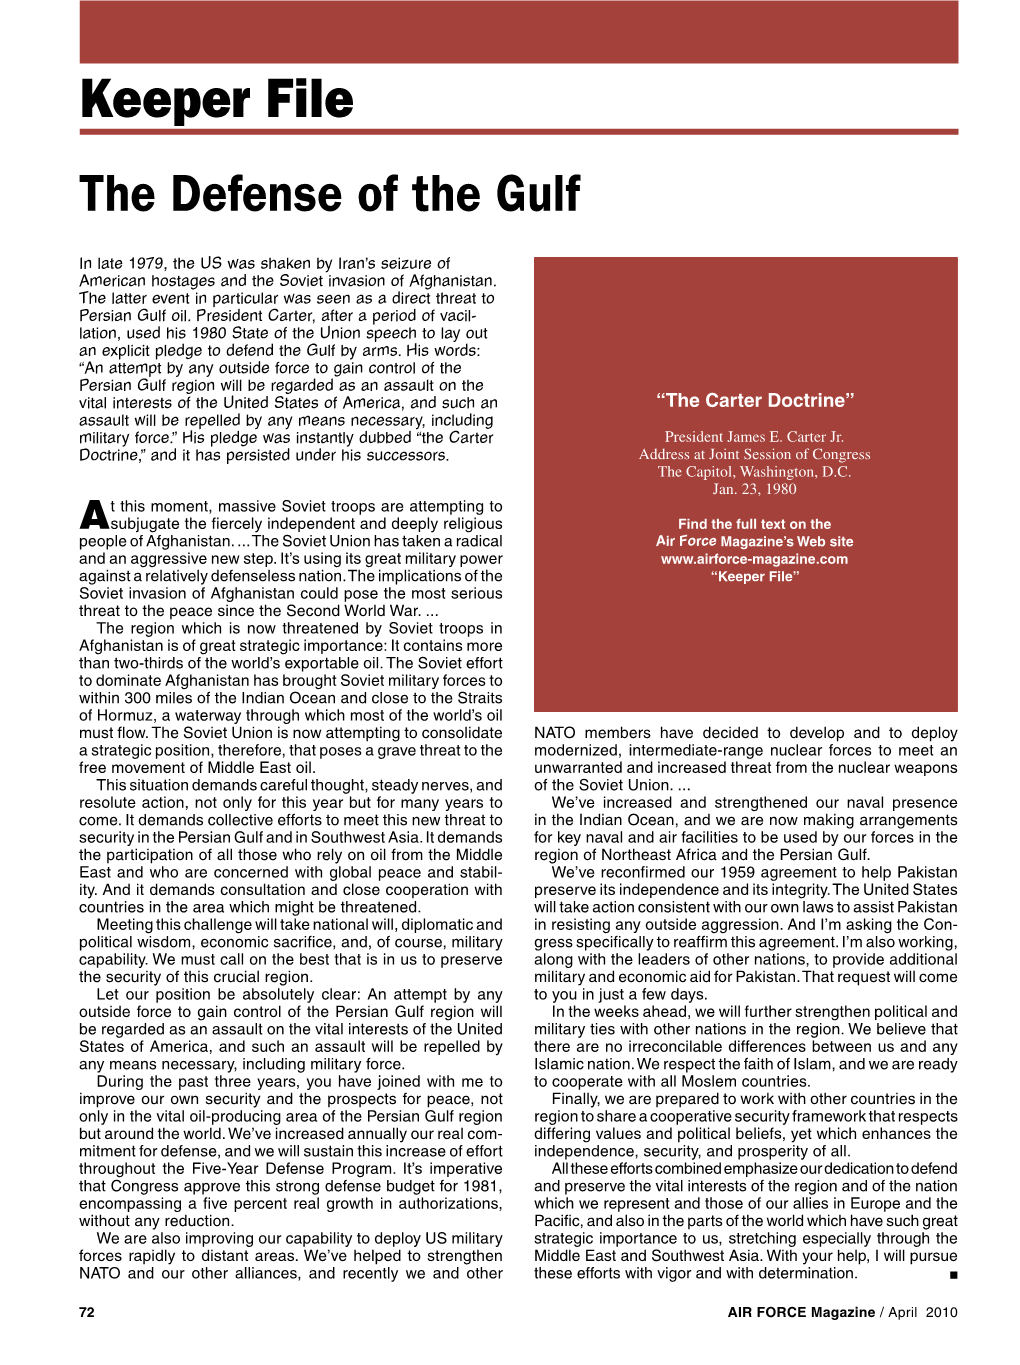 Keeper File the Defense of the Gulf